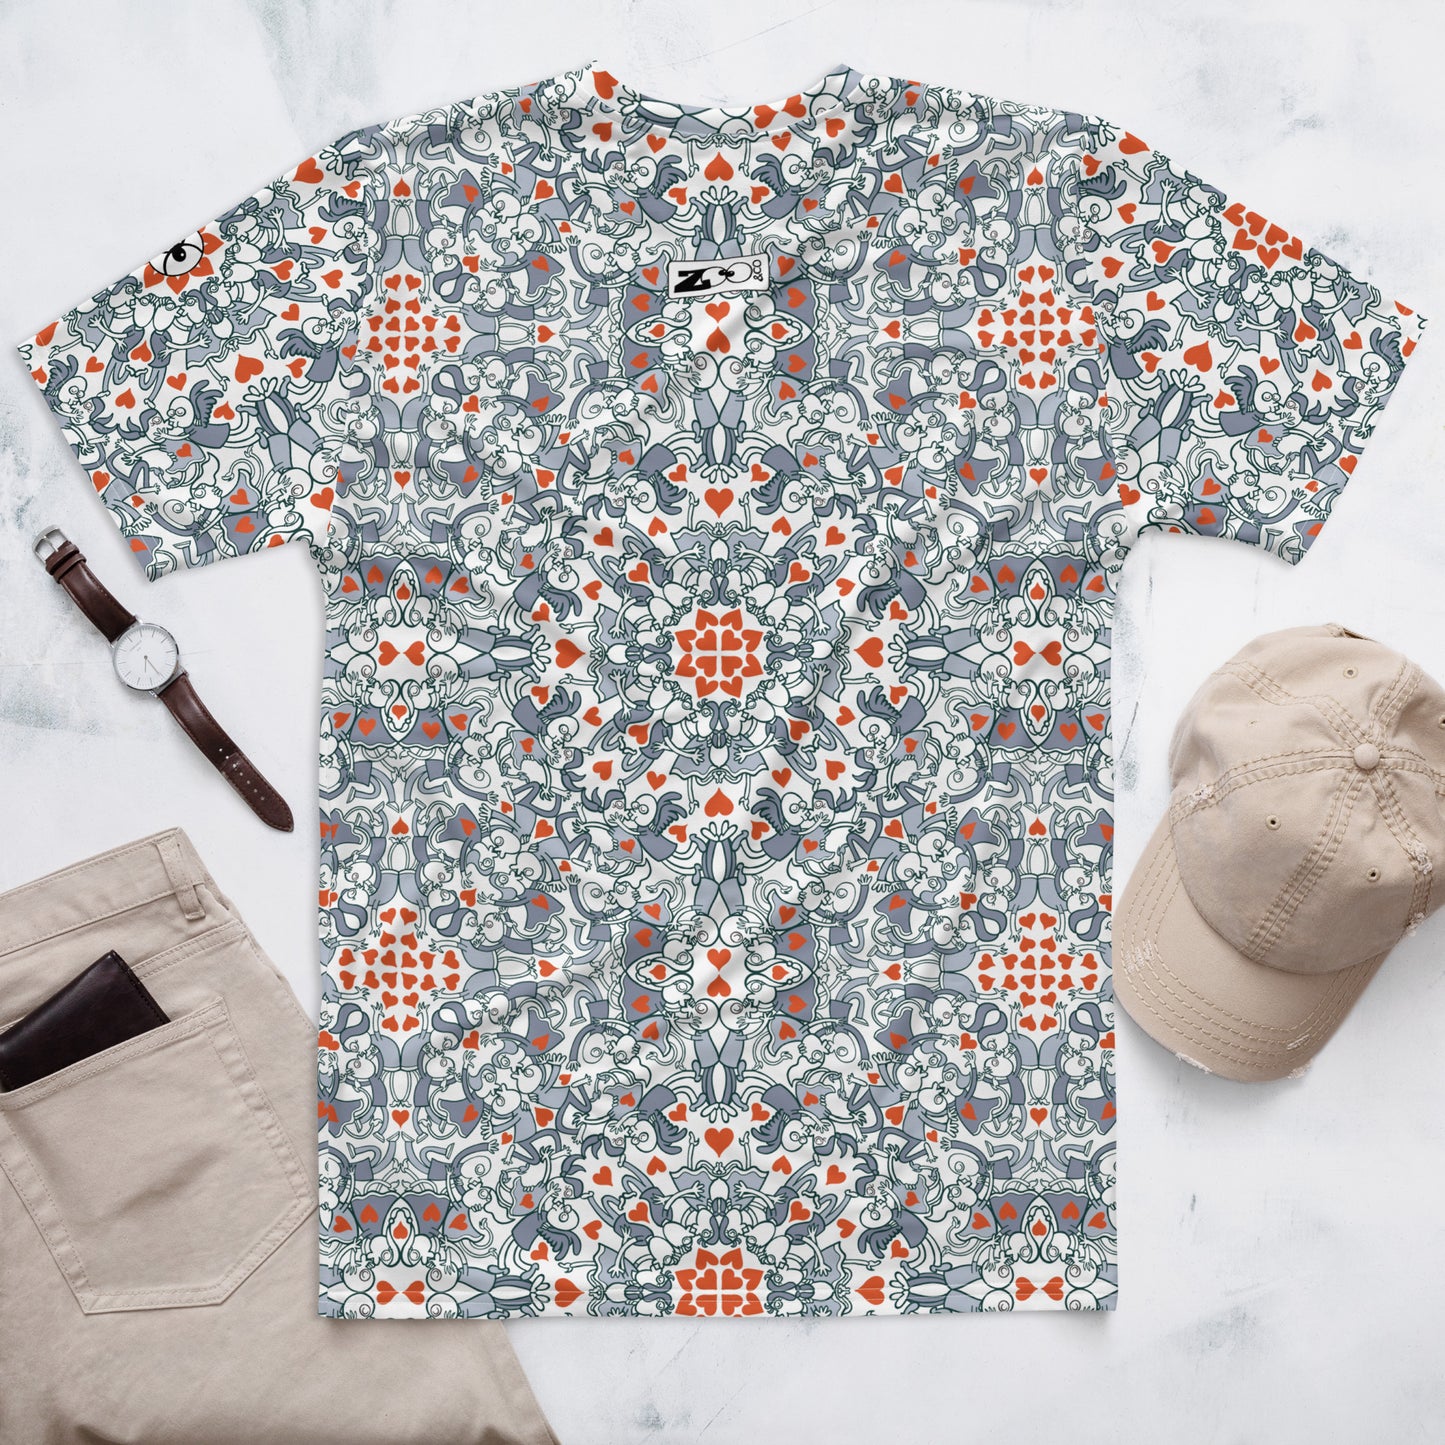 Kissed by Doodles in Valentine's Mandala Melody - Men's t-shirt. Lifestyle